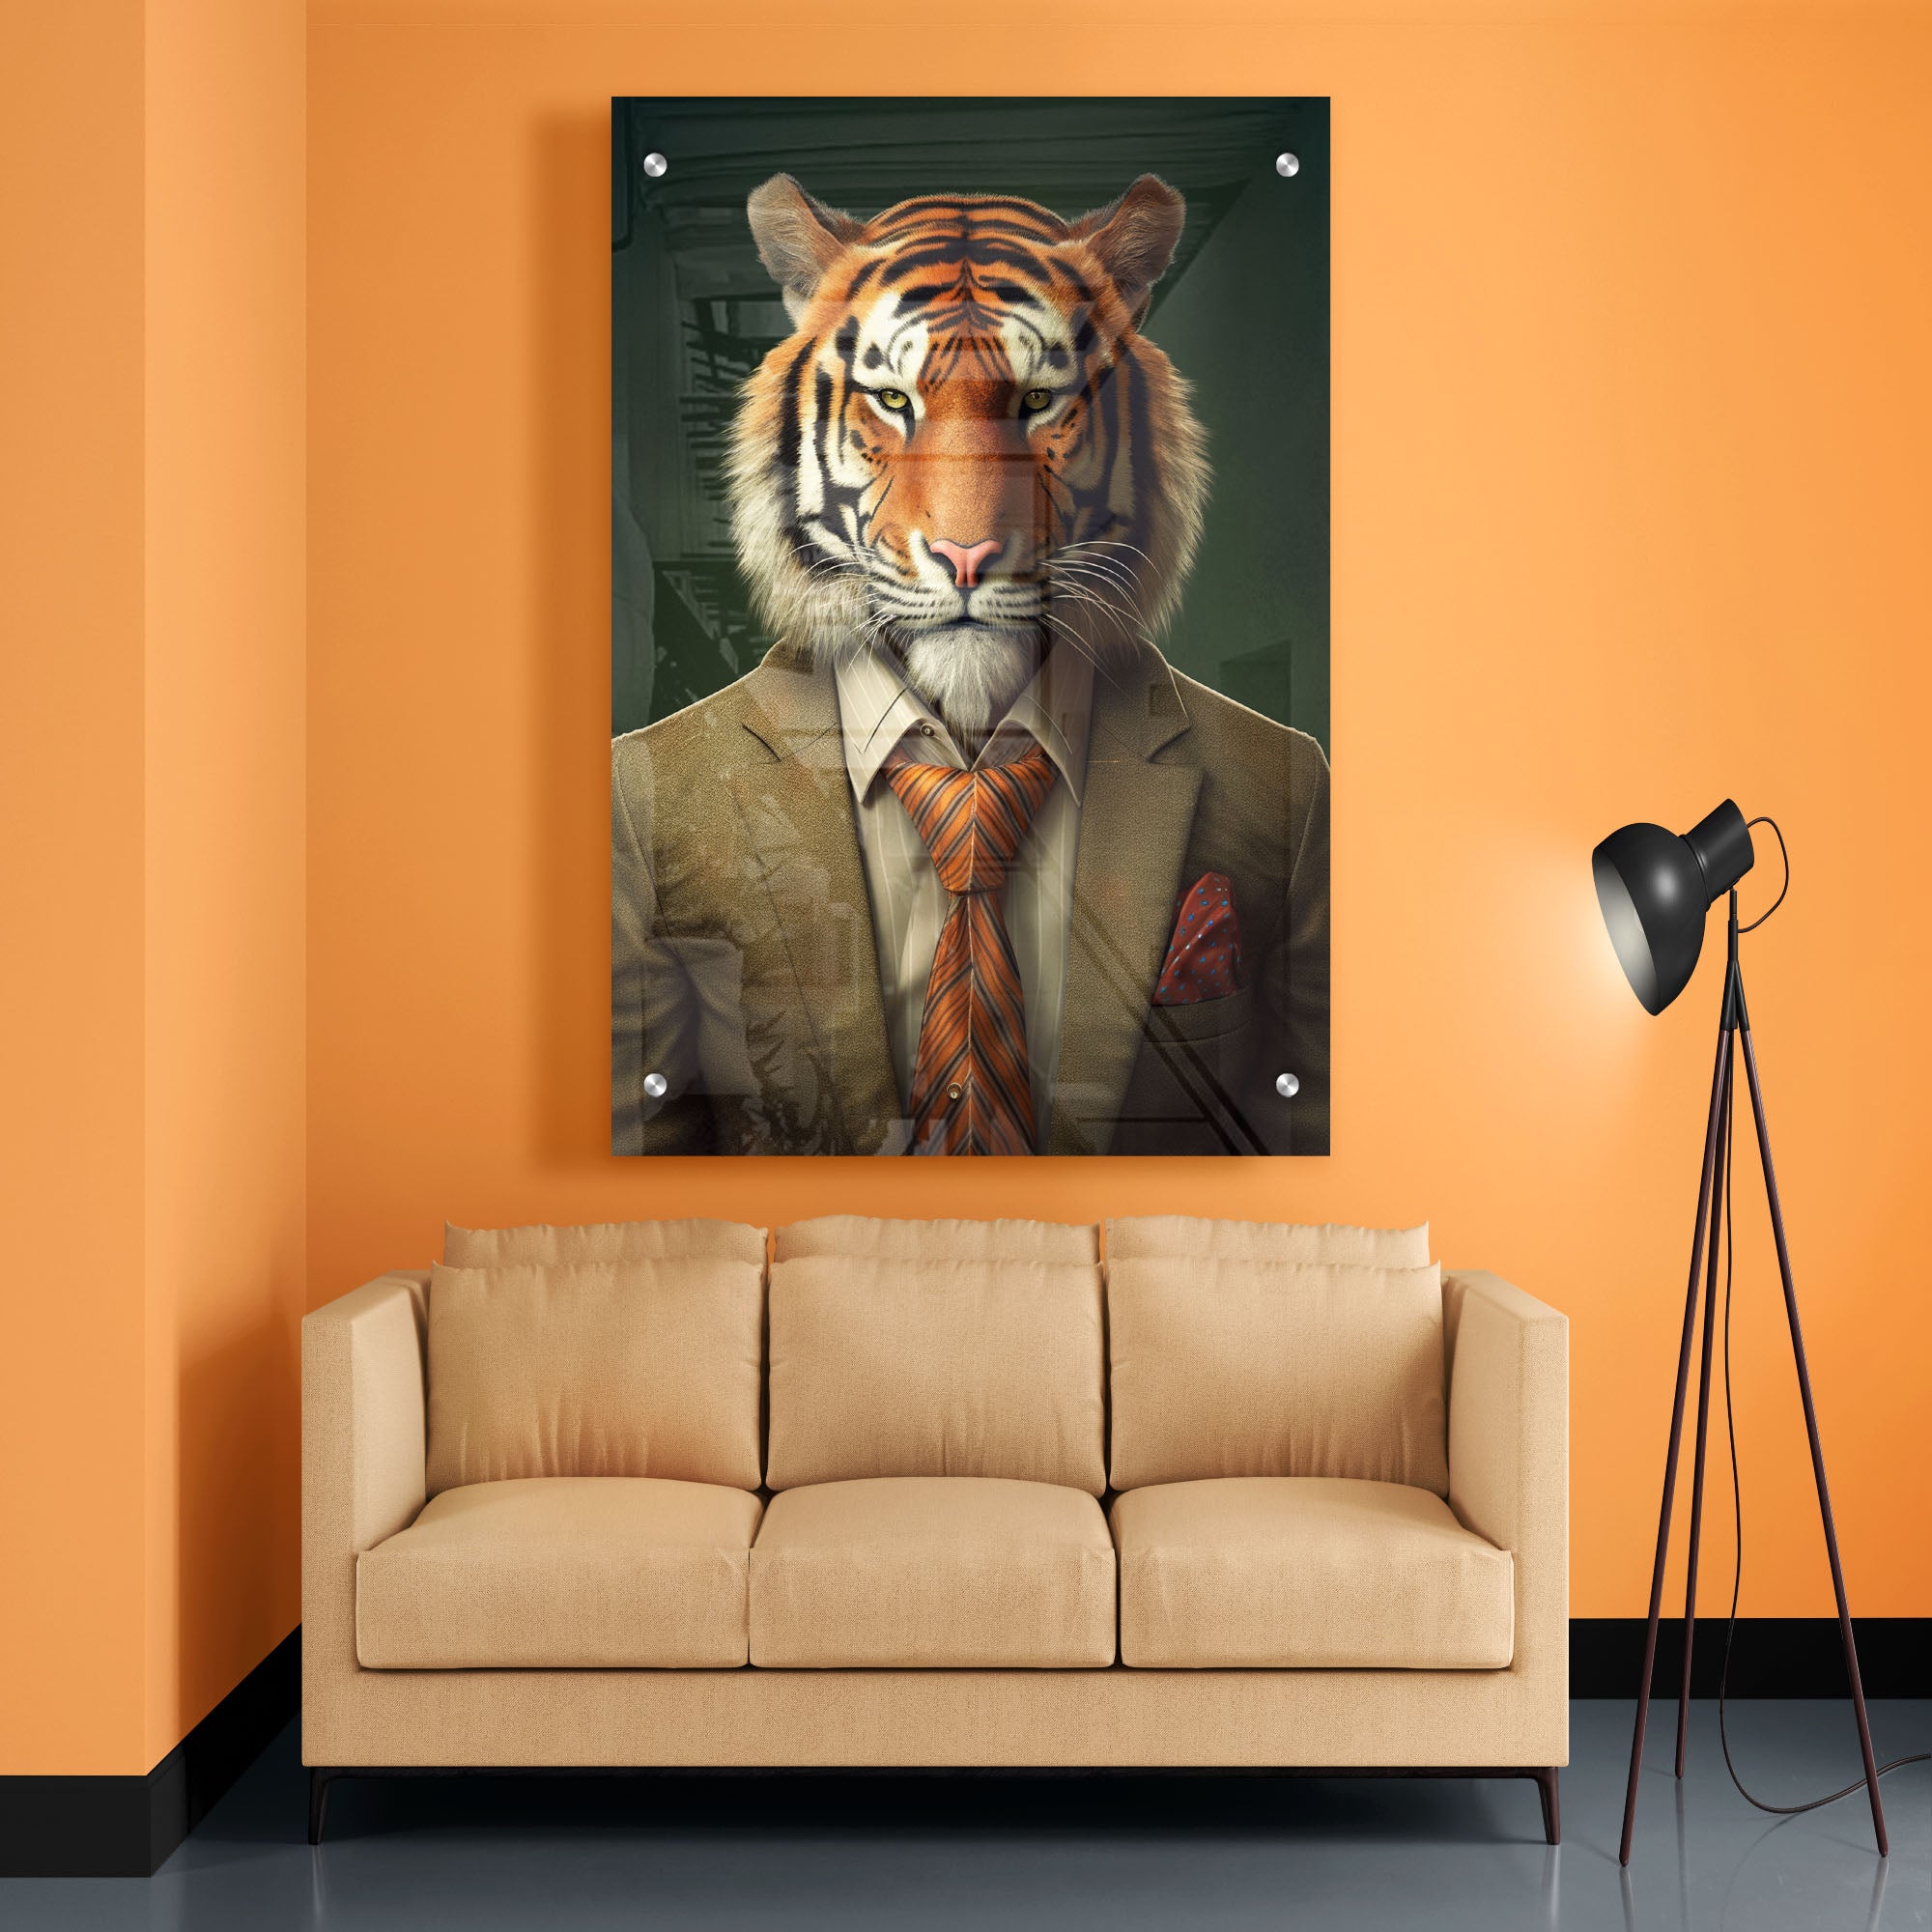 Tiger in Suit Acrylic Wall Painting